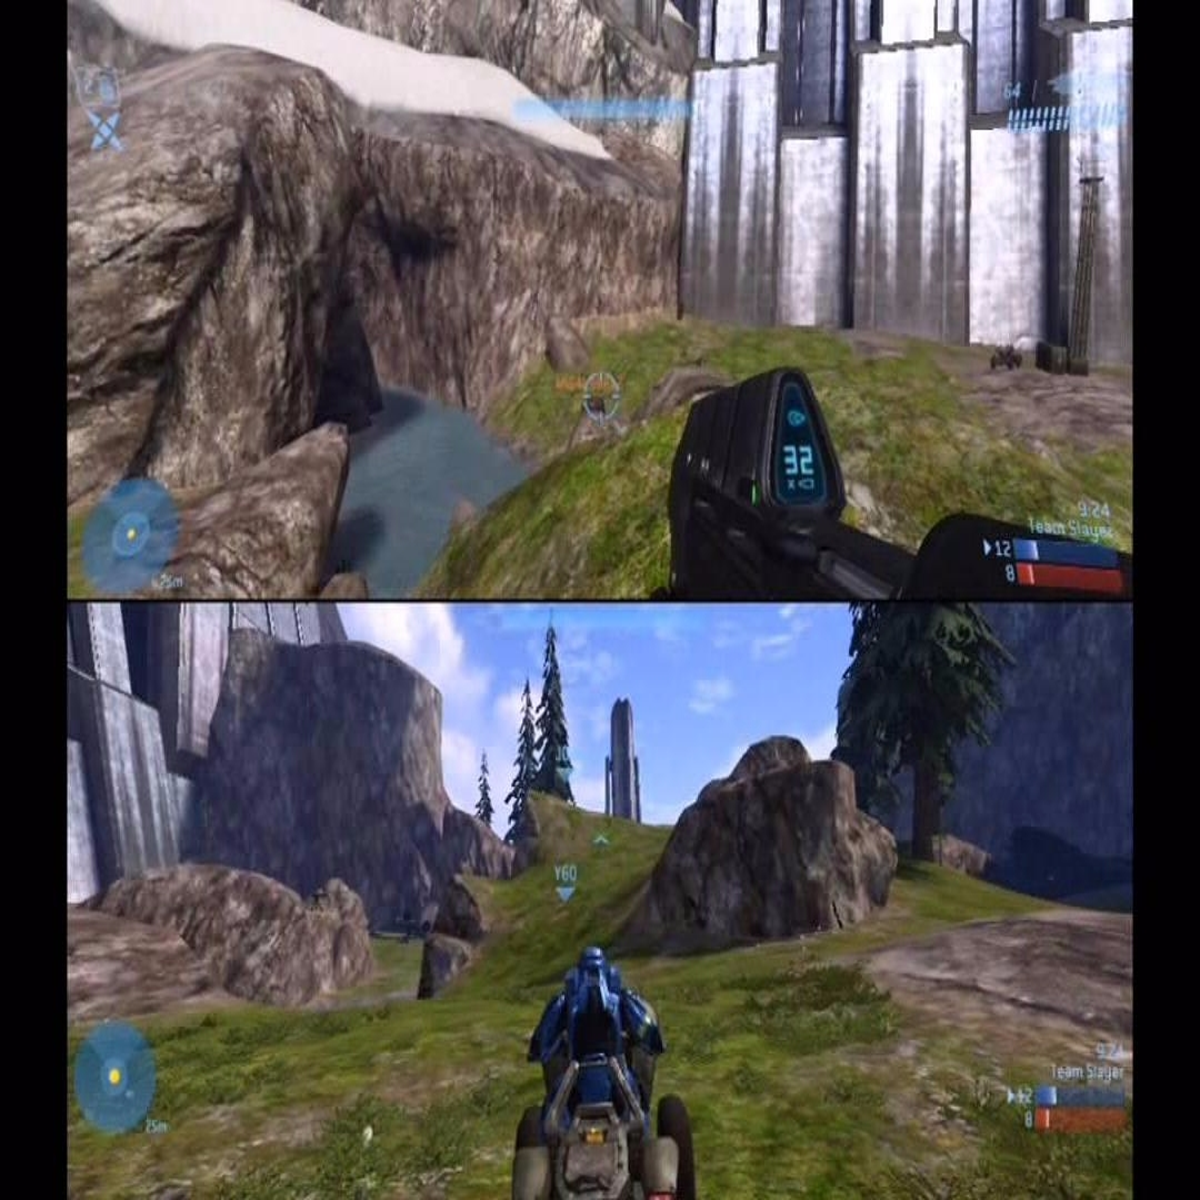 How to Play Halo Infinite Split Screen Multiplayer with Friends